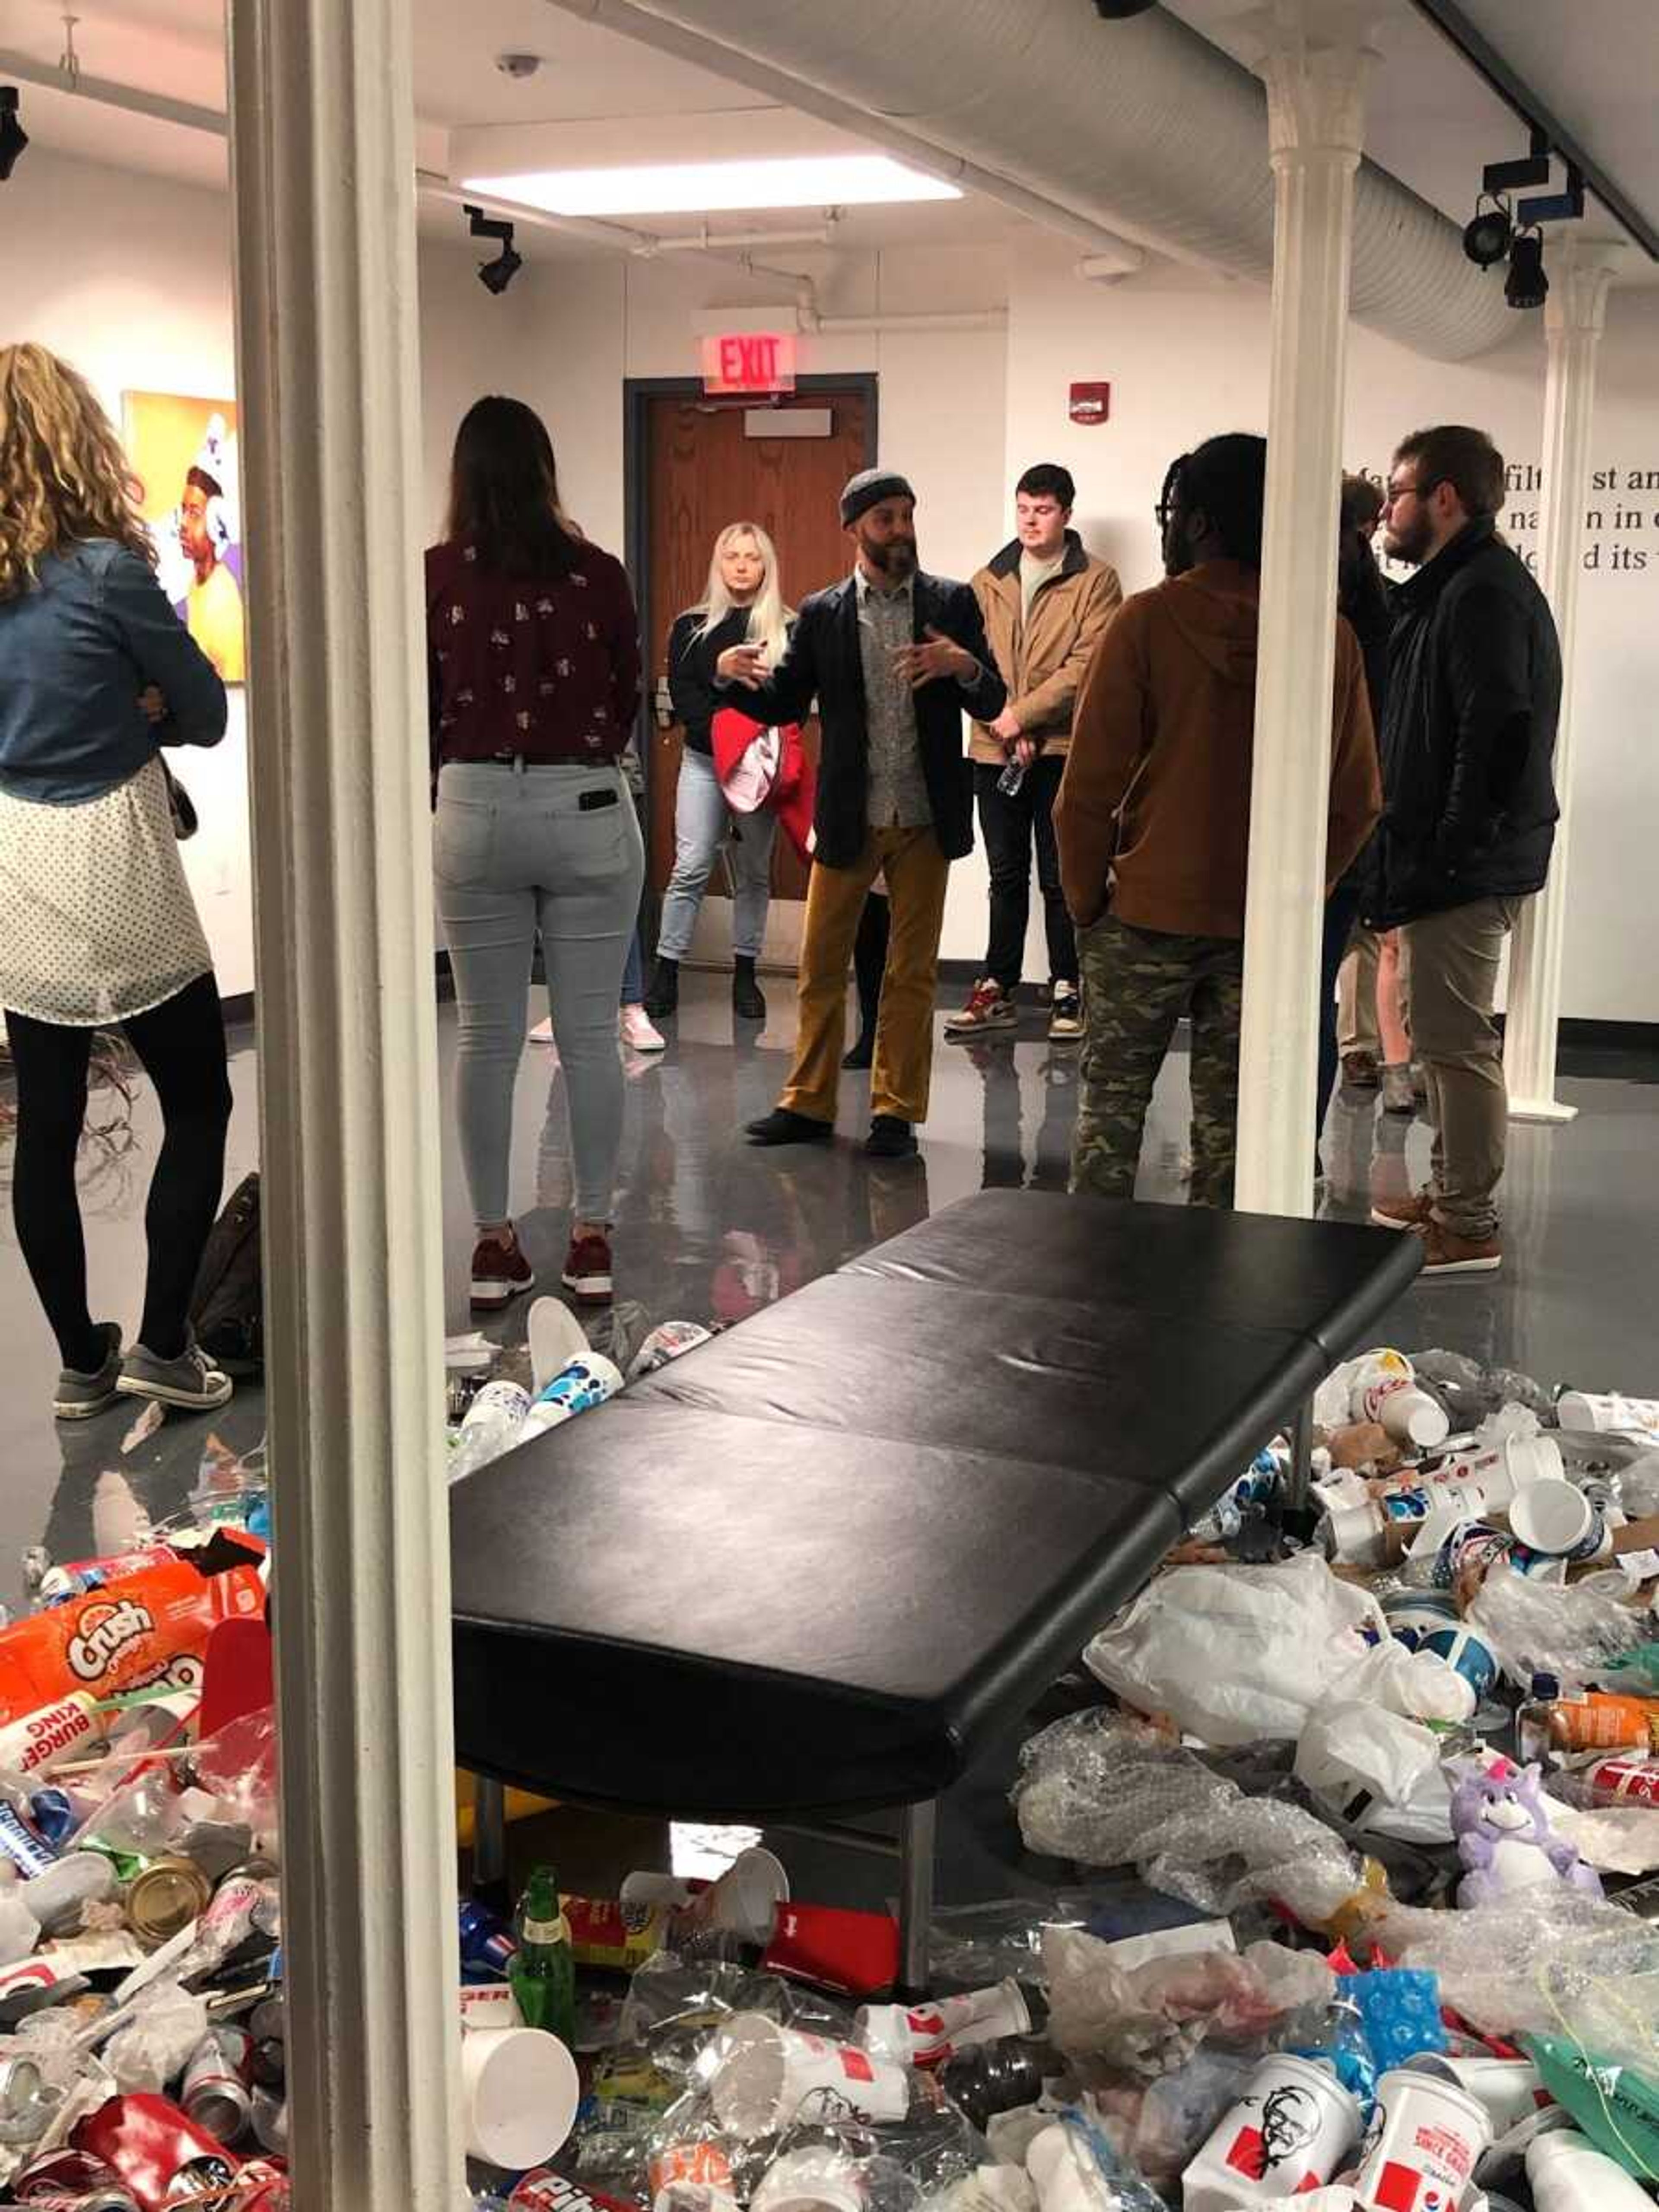 Artist, Jousha Newth, explains his newest exhibit “Acts of Unreason” with “Garbage Patch People” art piece surrounding the viewers. 